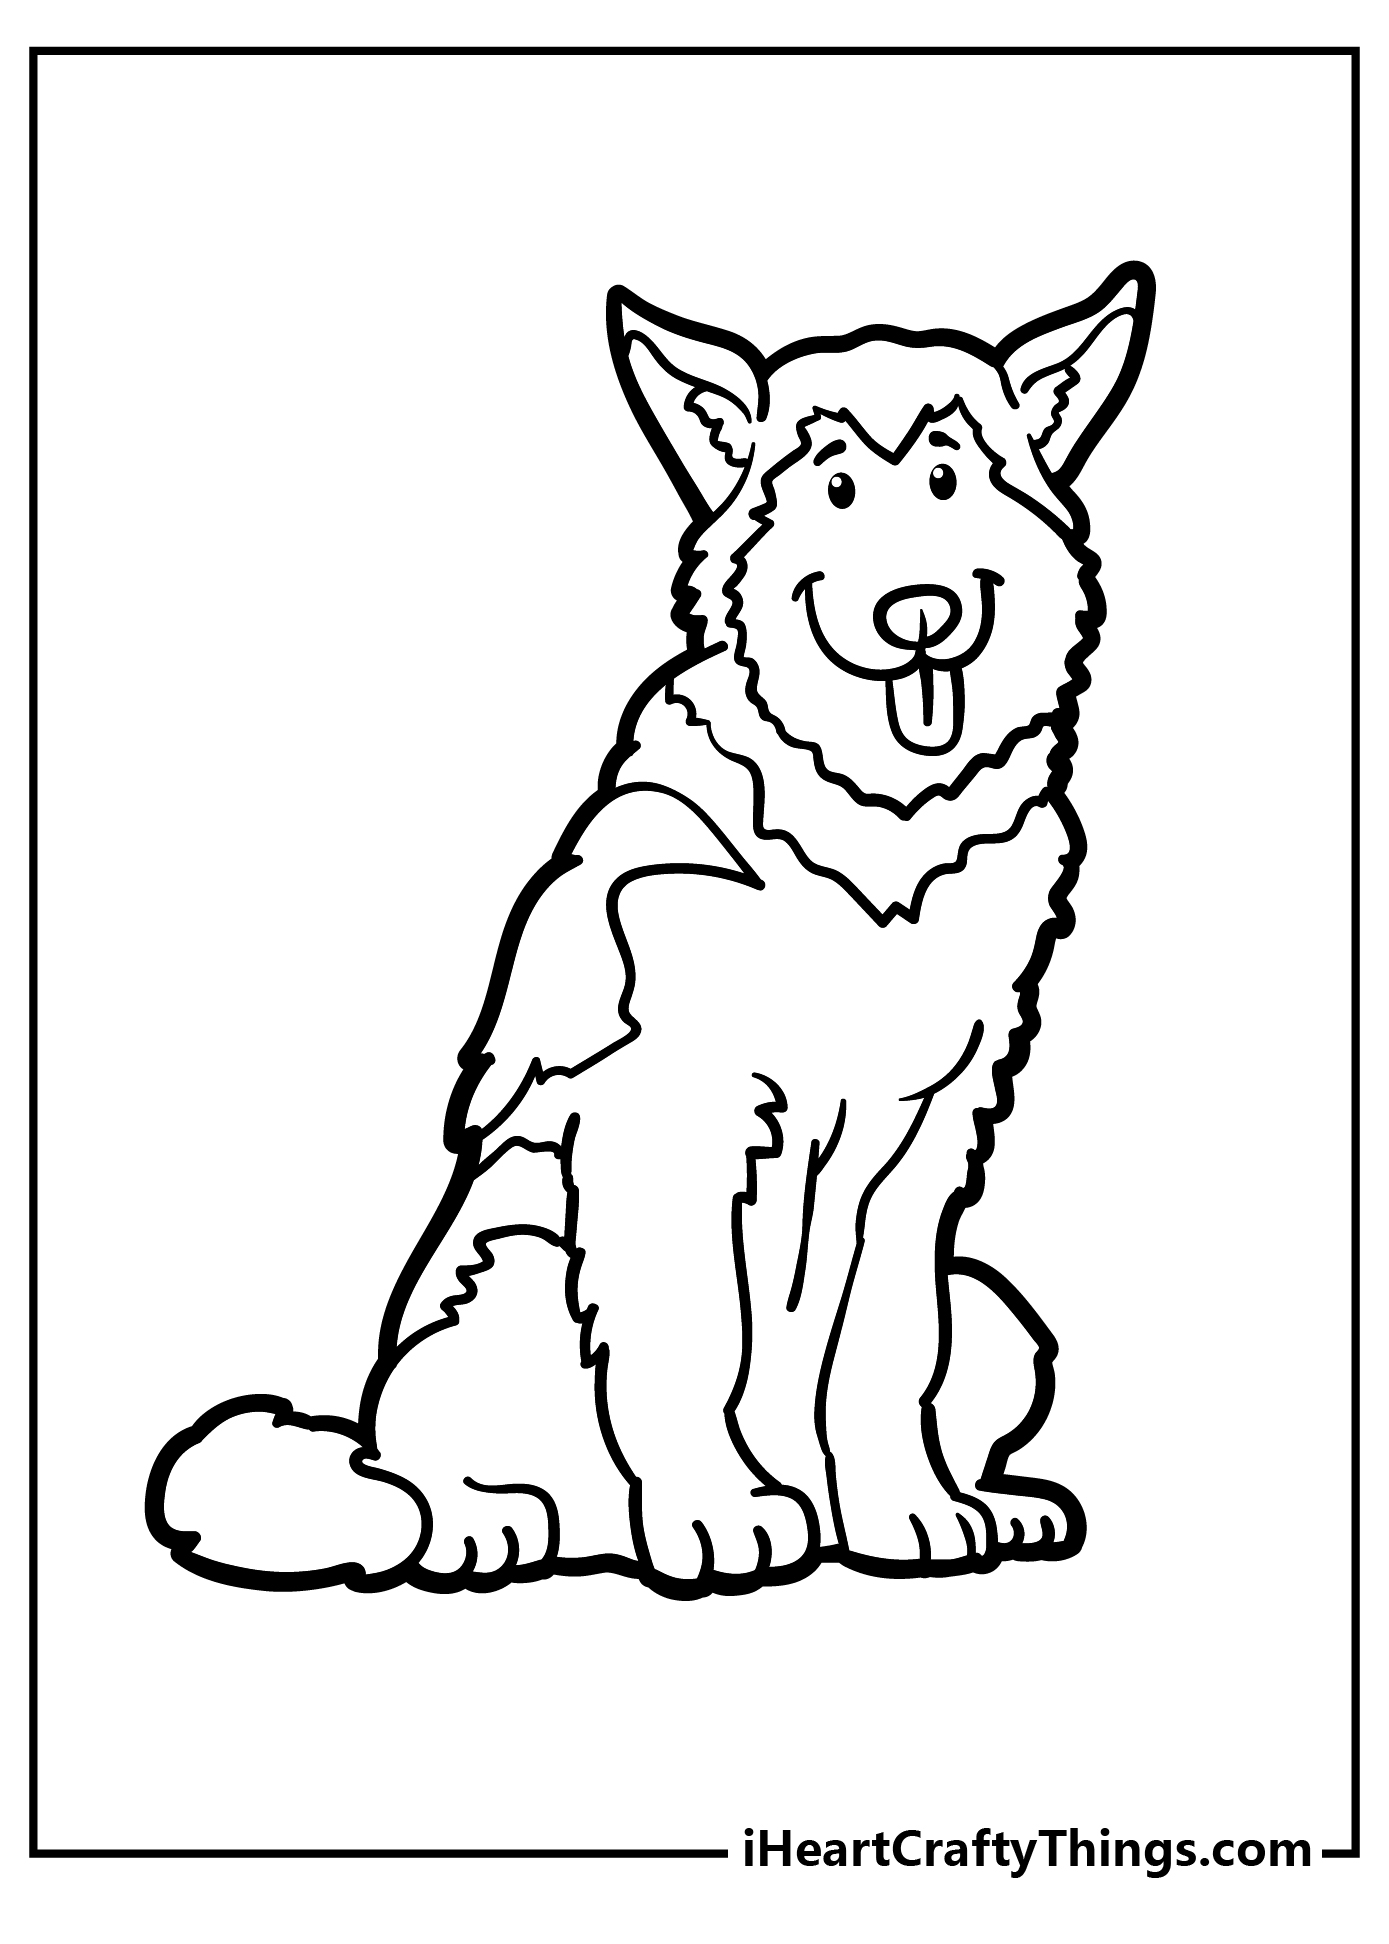 Husky Coloring Pages for preschoolers free printable